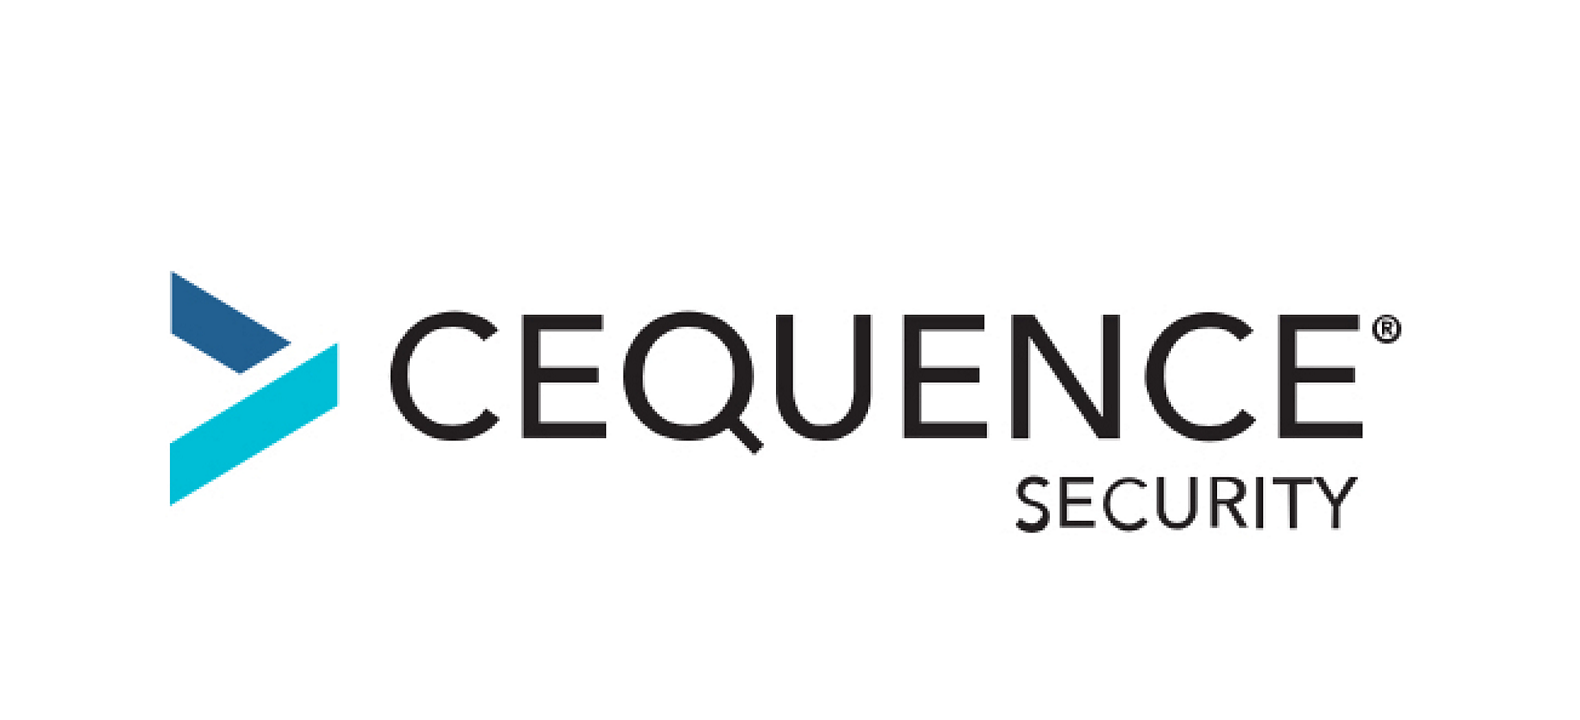 Cequence® Security.